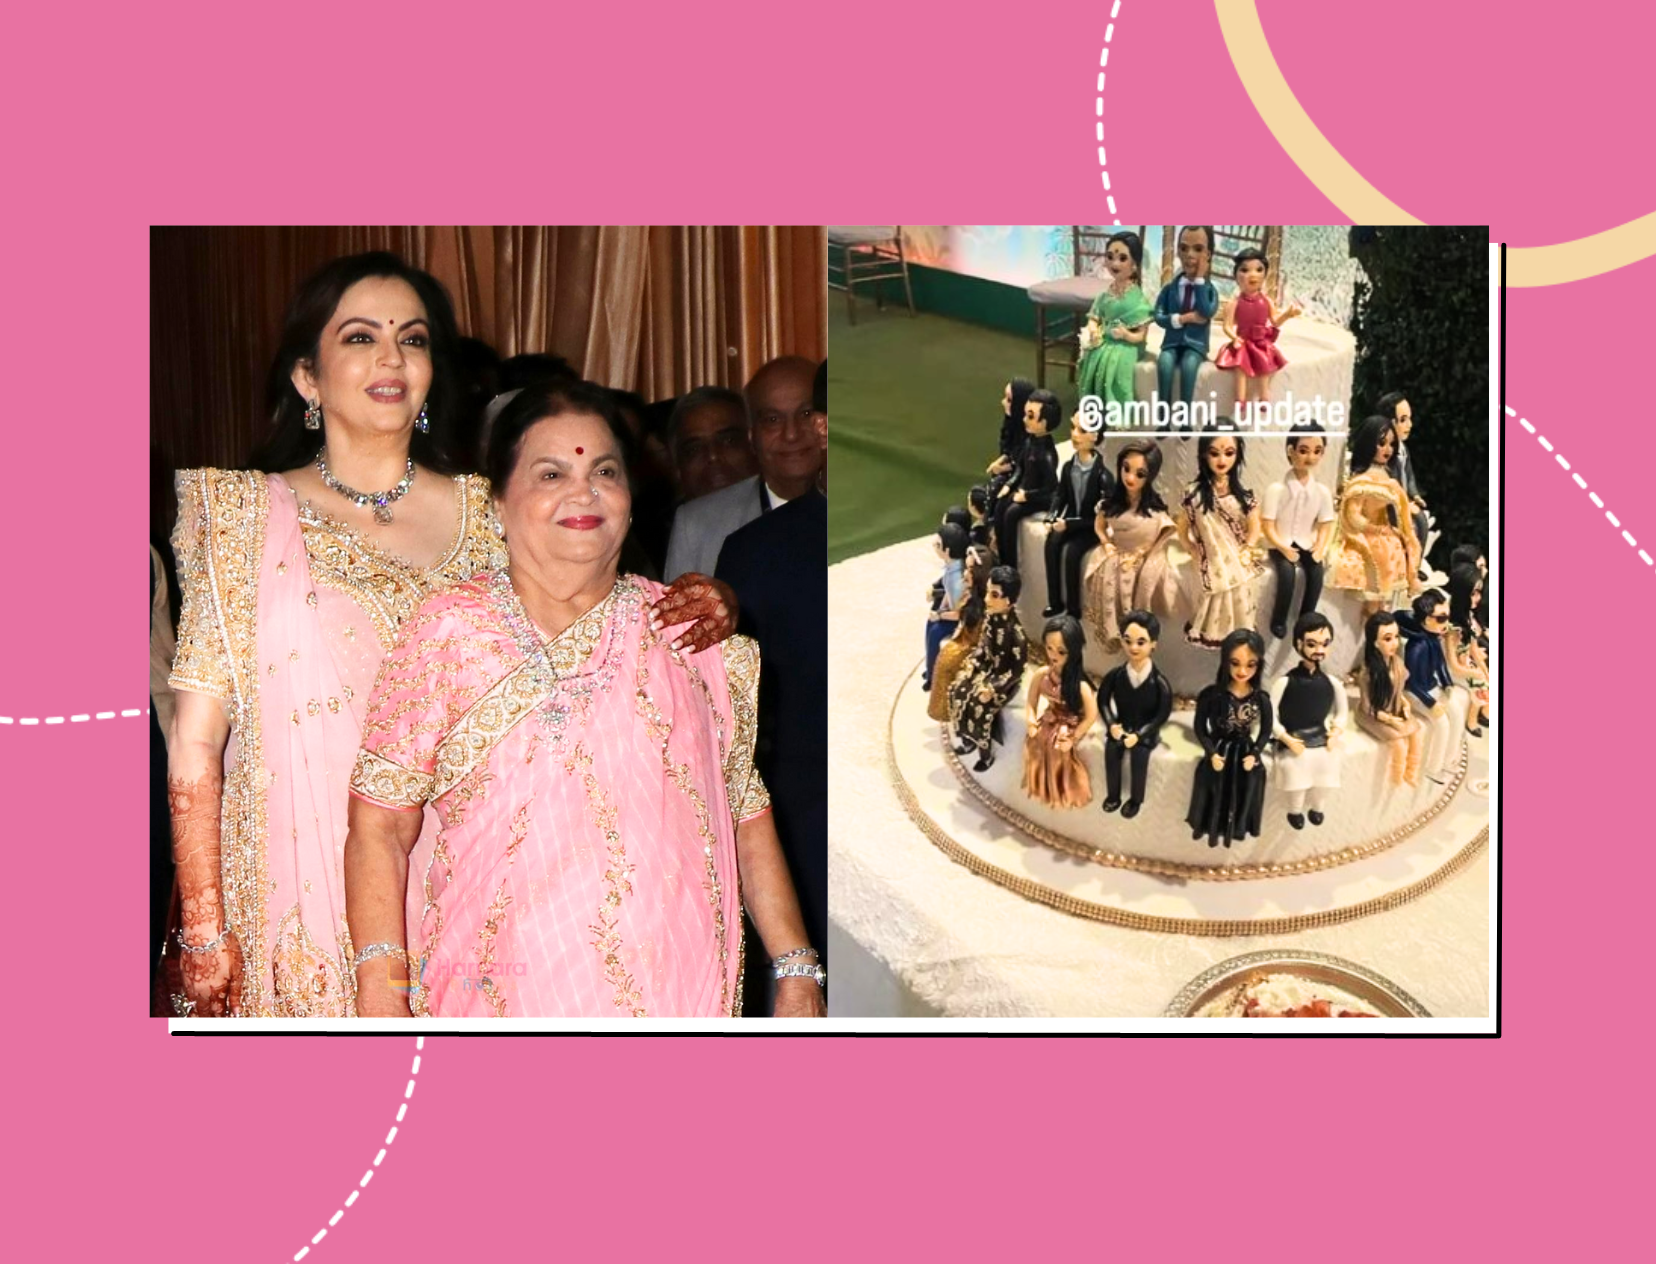 Crazy Rich Ambanis: 5 outrageous splurges Mukesh and Nita Ambani spend  their money on, from Boeings as birthday gifts to a whole floor dedicated  to Bentleys and Porsches | South China Morning Post